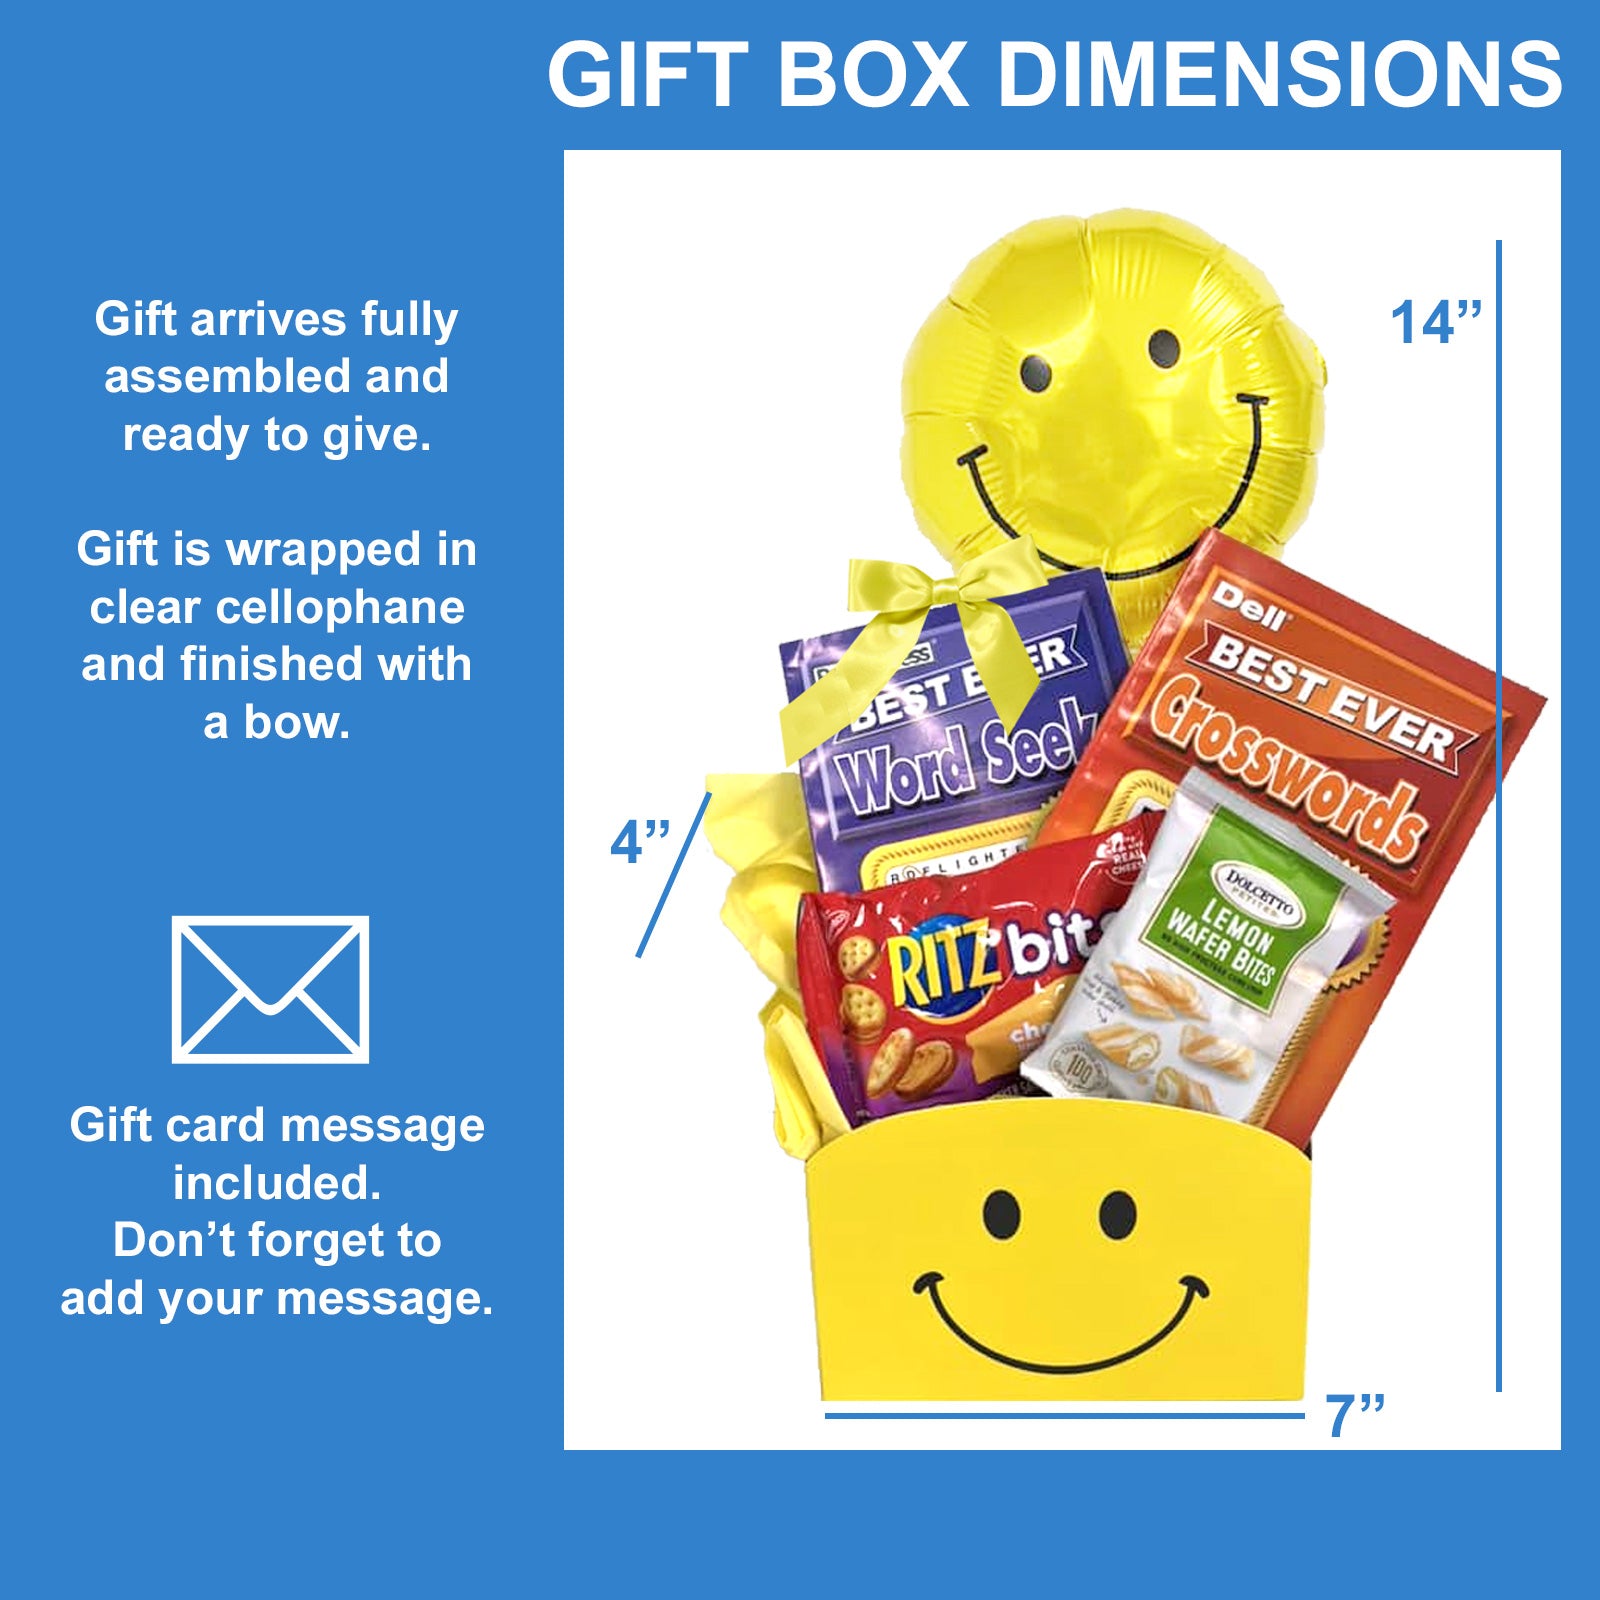 Comforting Get Well Gift Box has Puzzle Books and Snacks Unisex